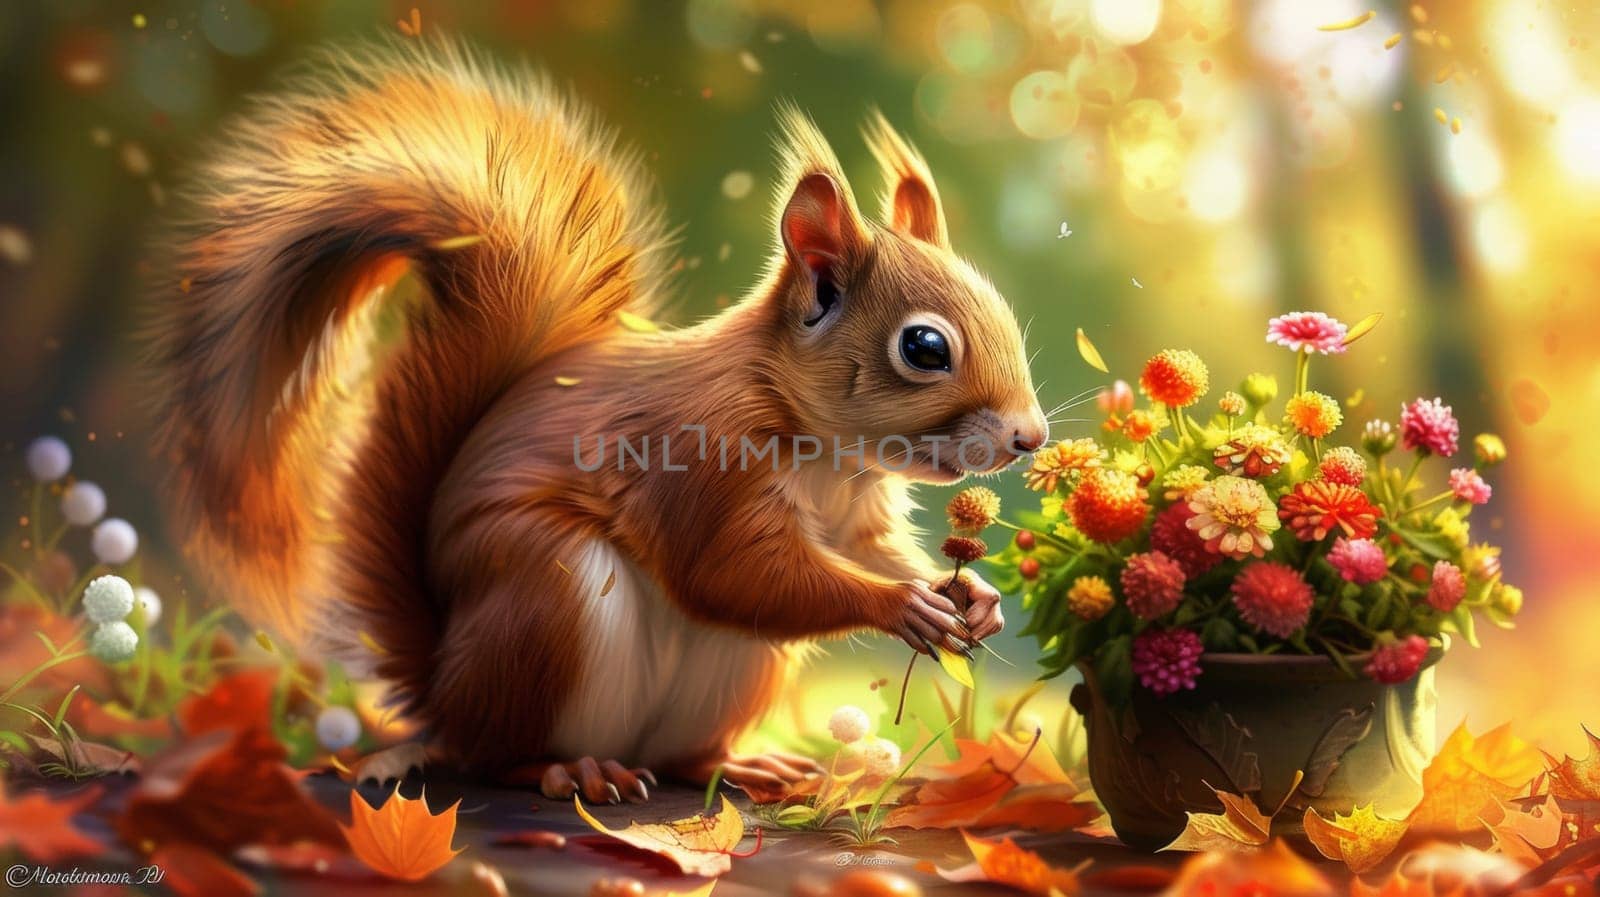 A squirrel is sitting on a flower pot with flowers and leaves